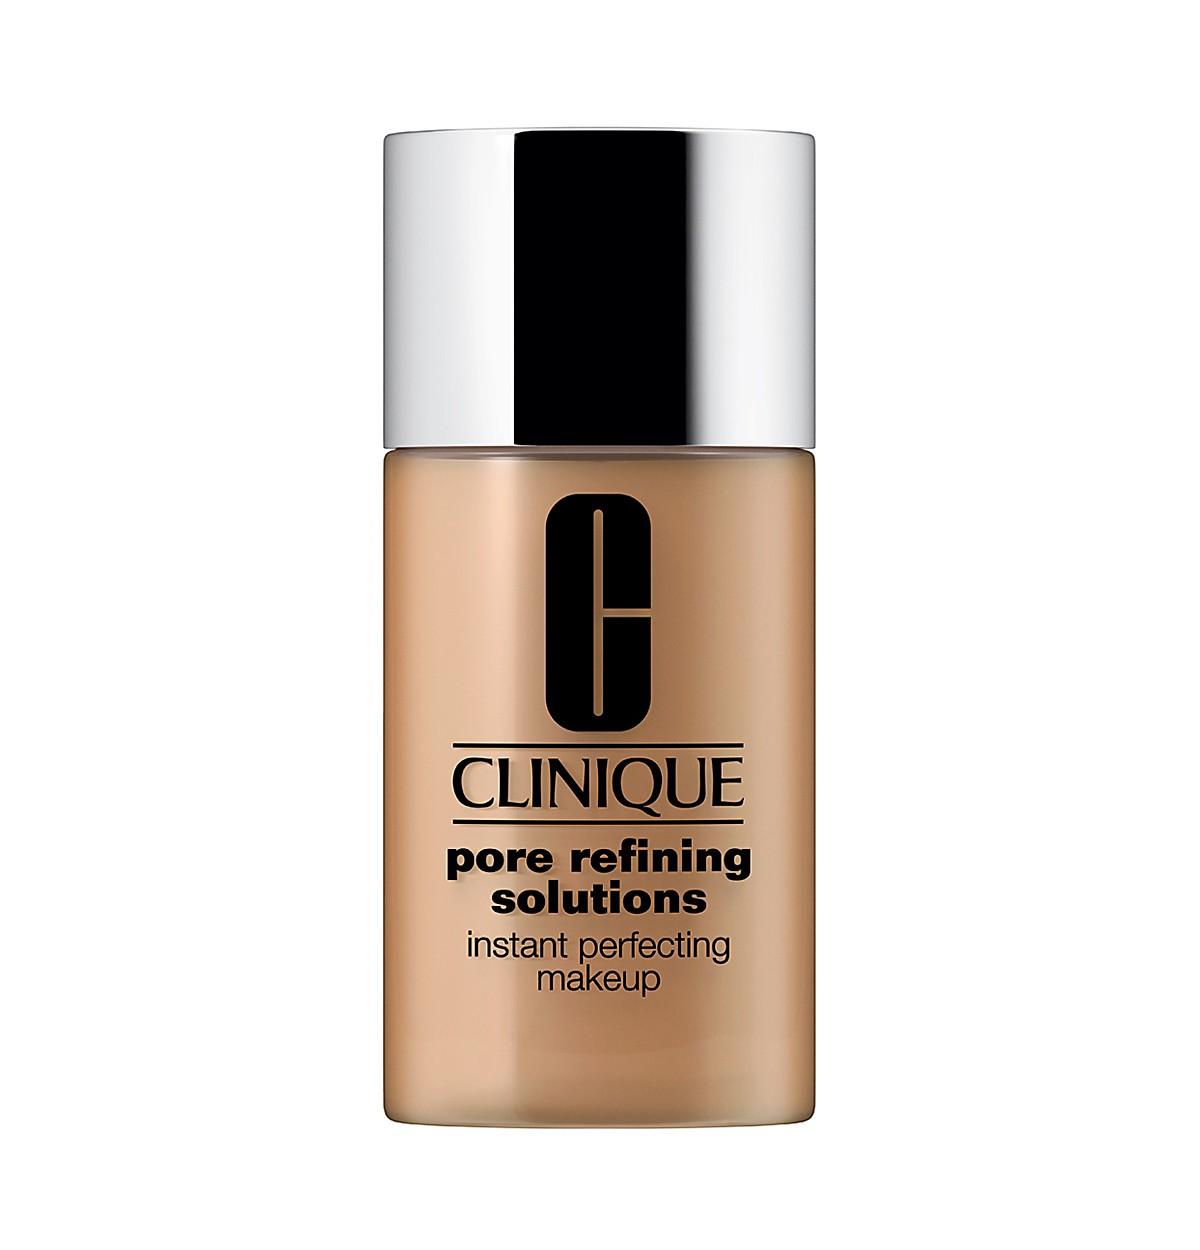 Foto Mujer Maquillaje Clinique Pore Refining Solutions Instant Perfecting foto 762761